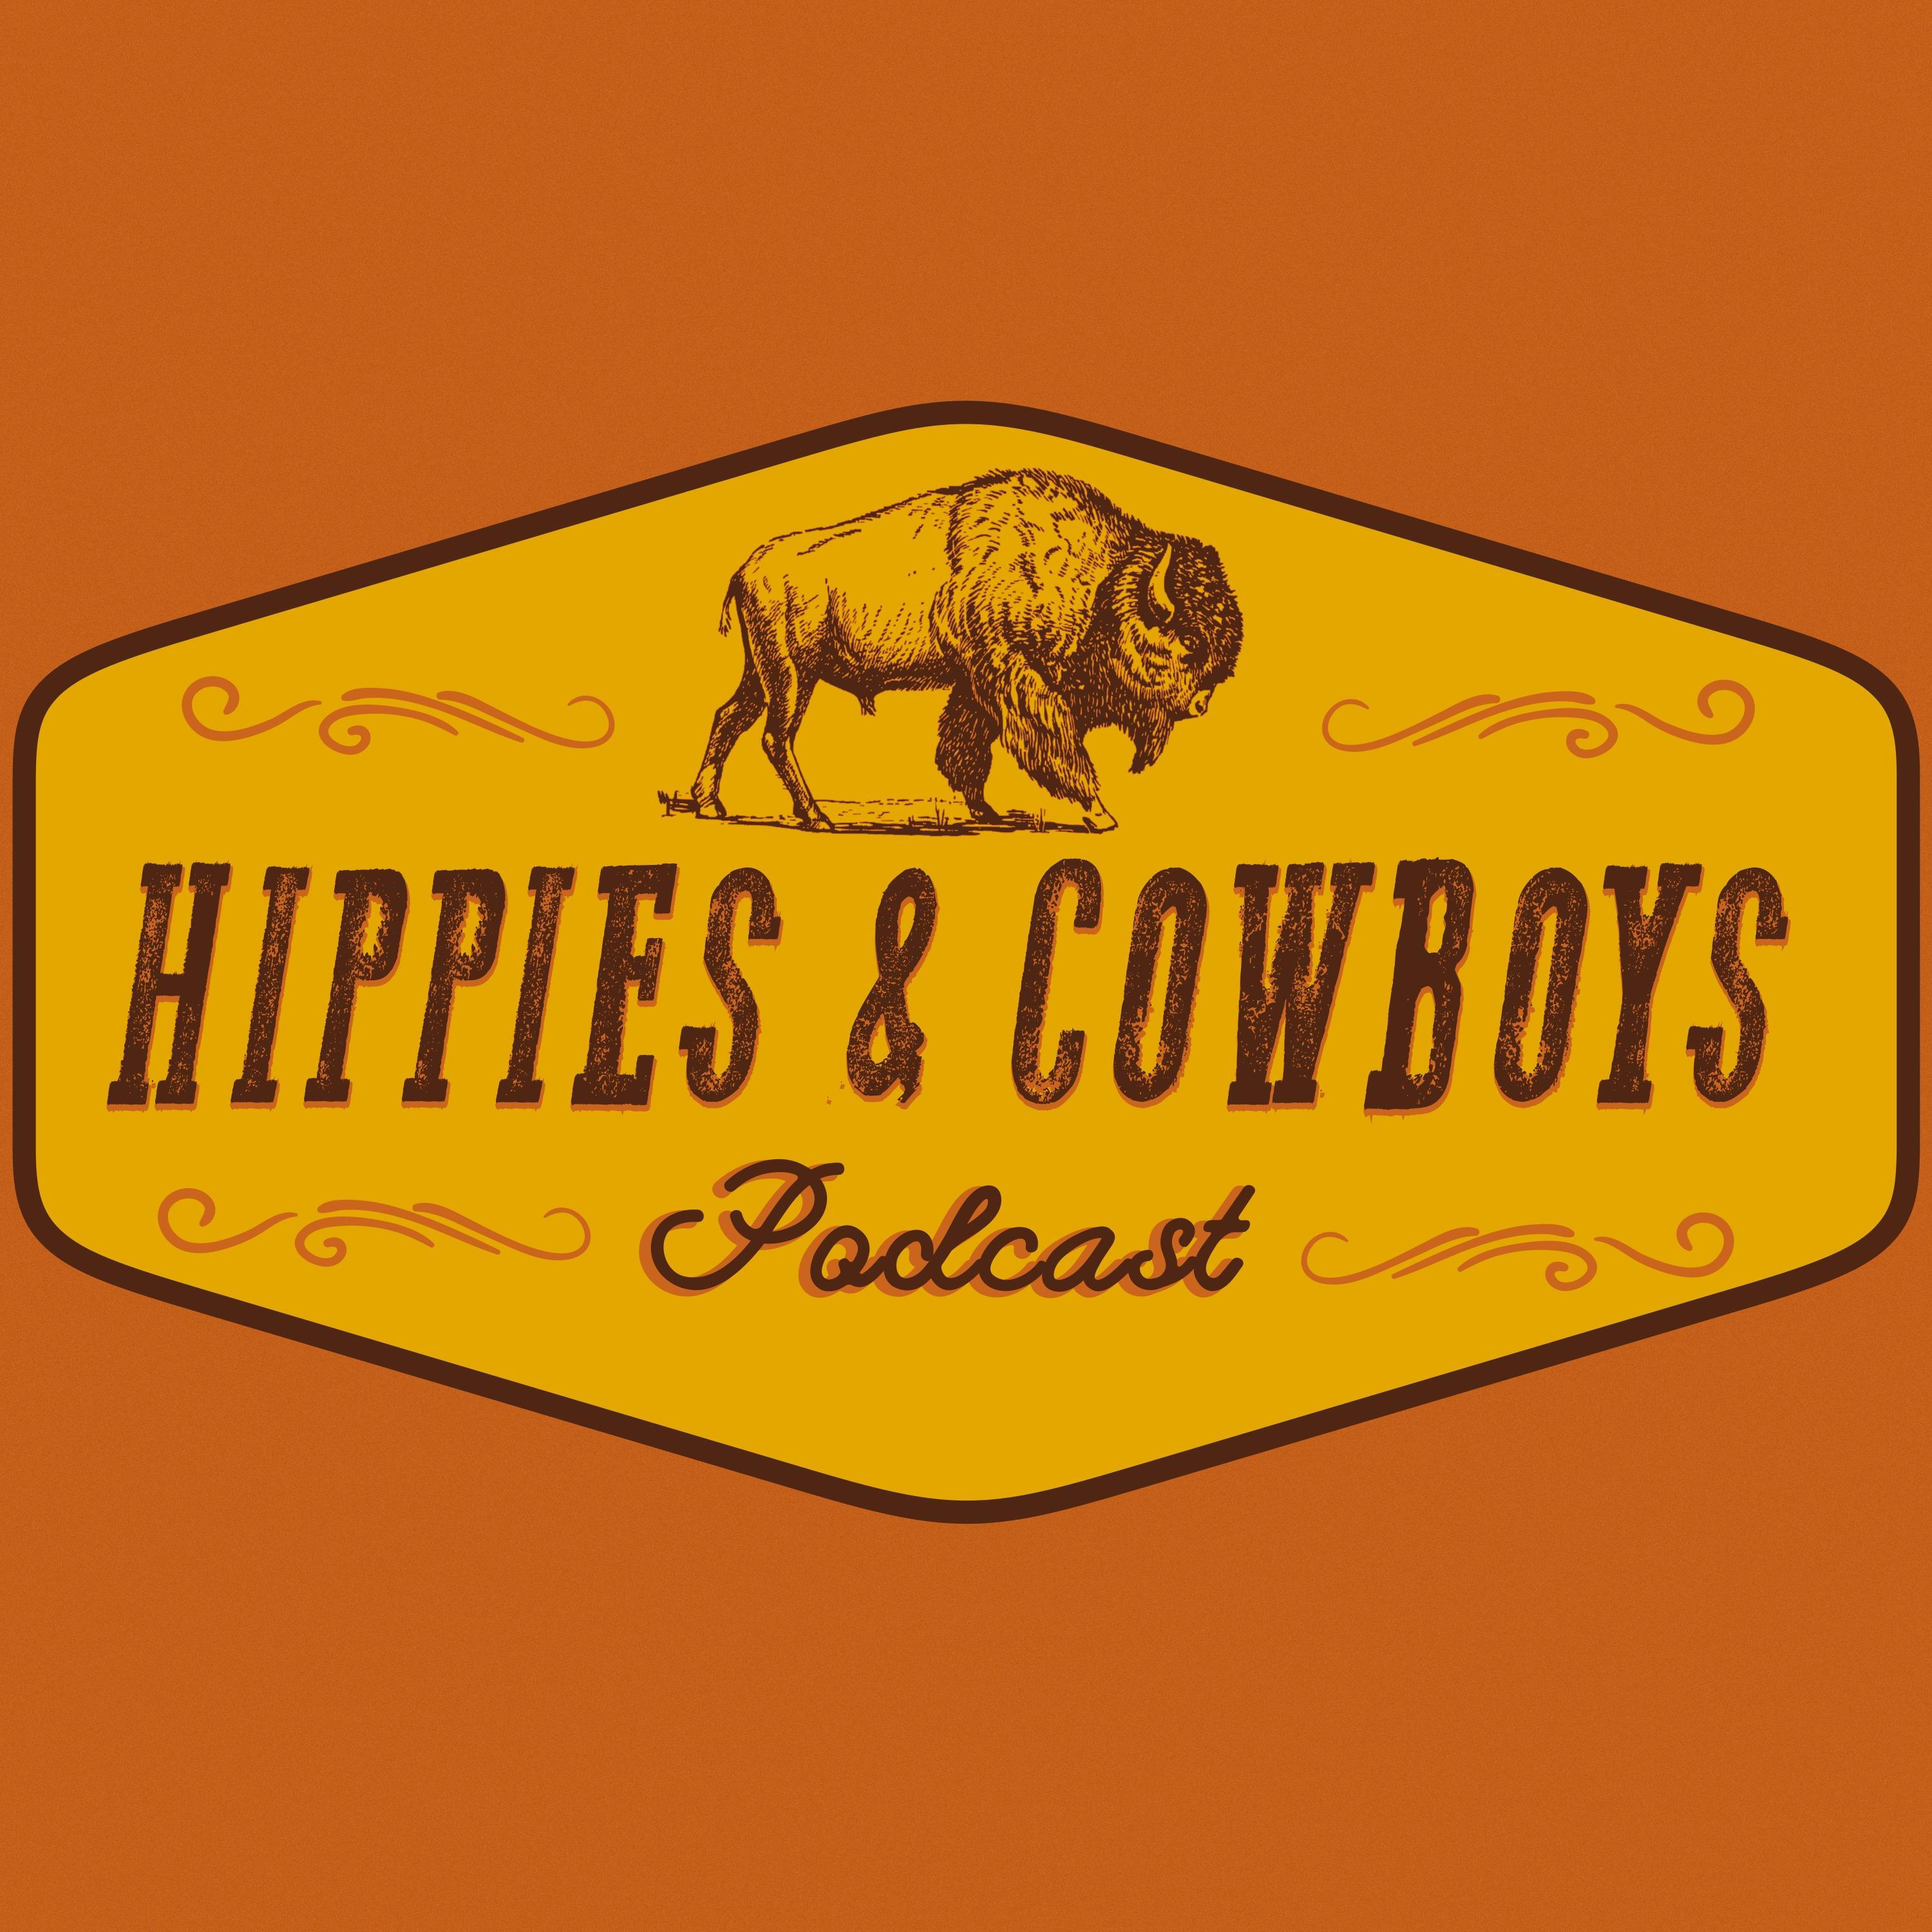 Hippies & Cowboys Podcast iHeart